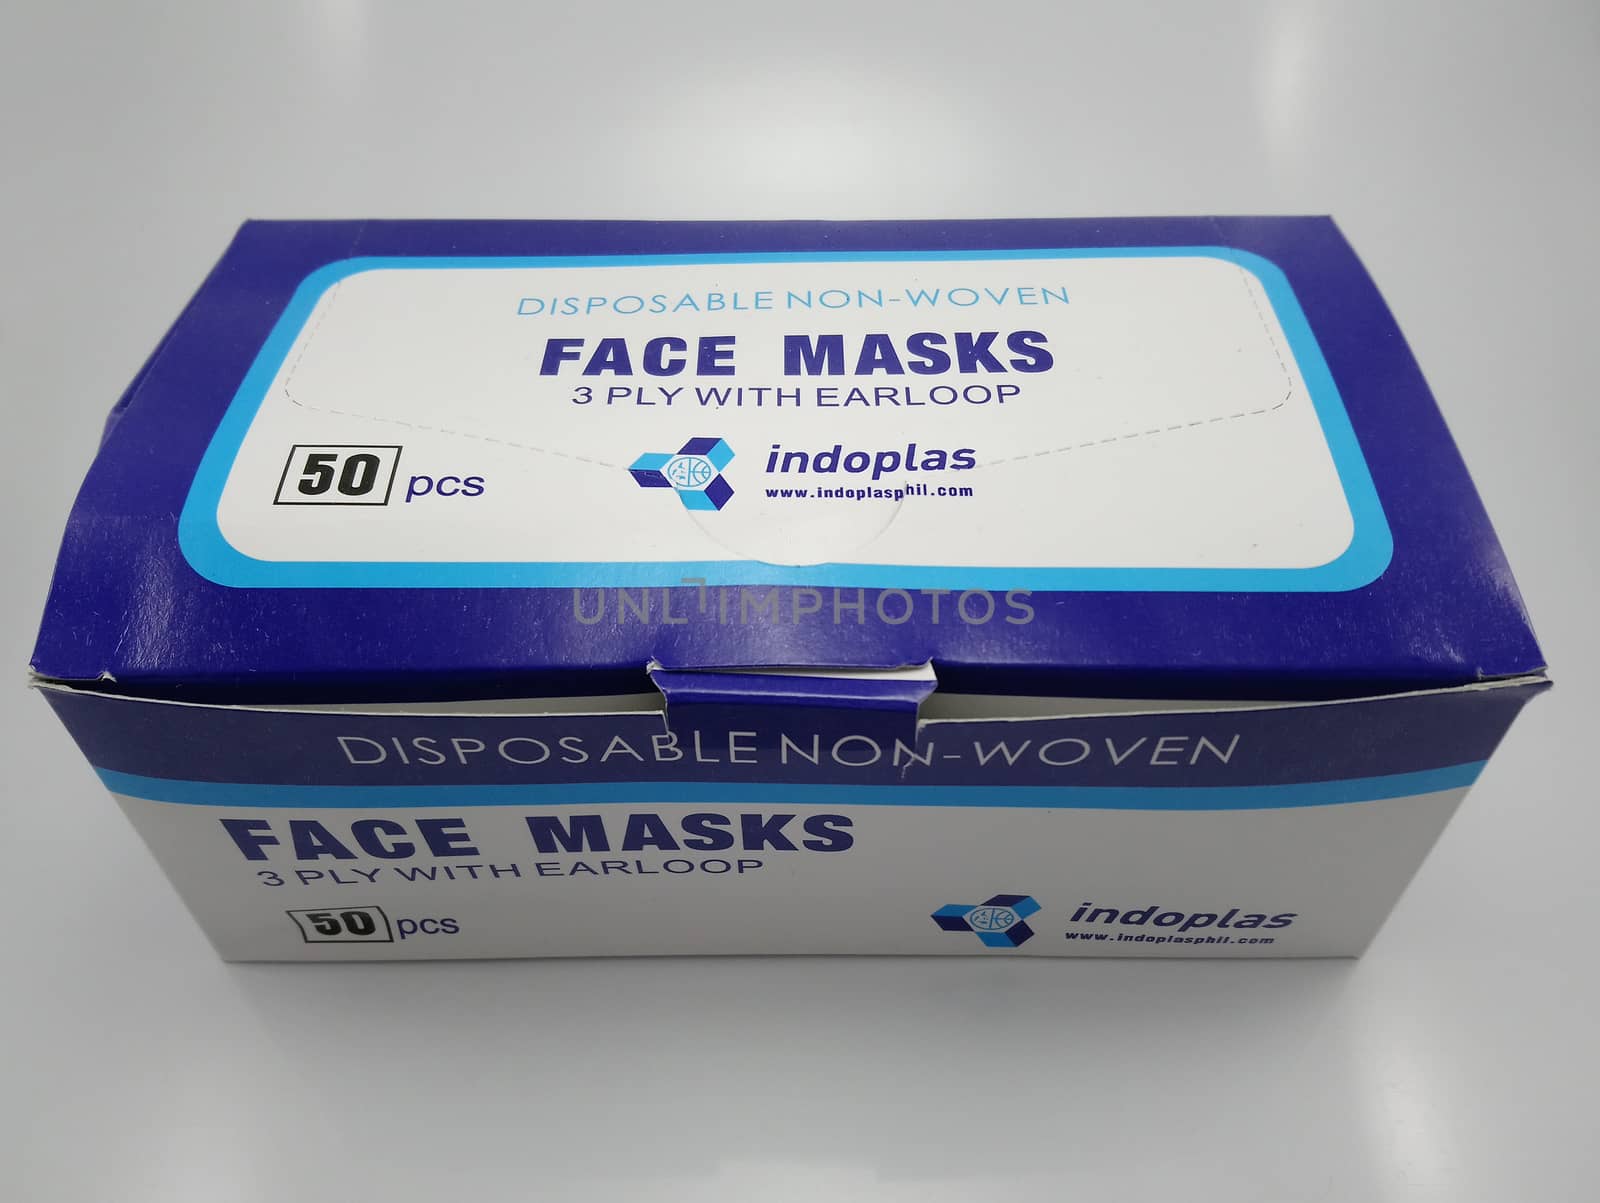 Indoplas disposable non woven face masks 3 ply with earloop in M by imwaltersy